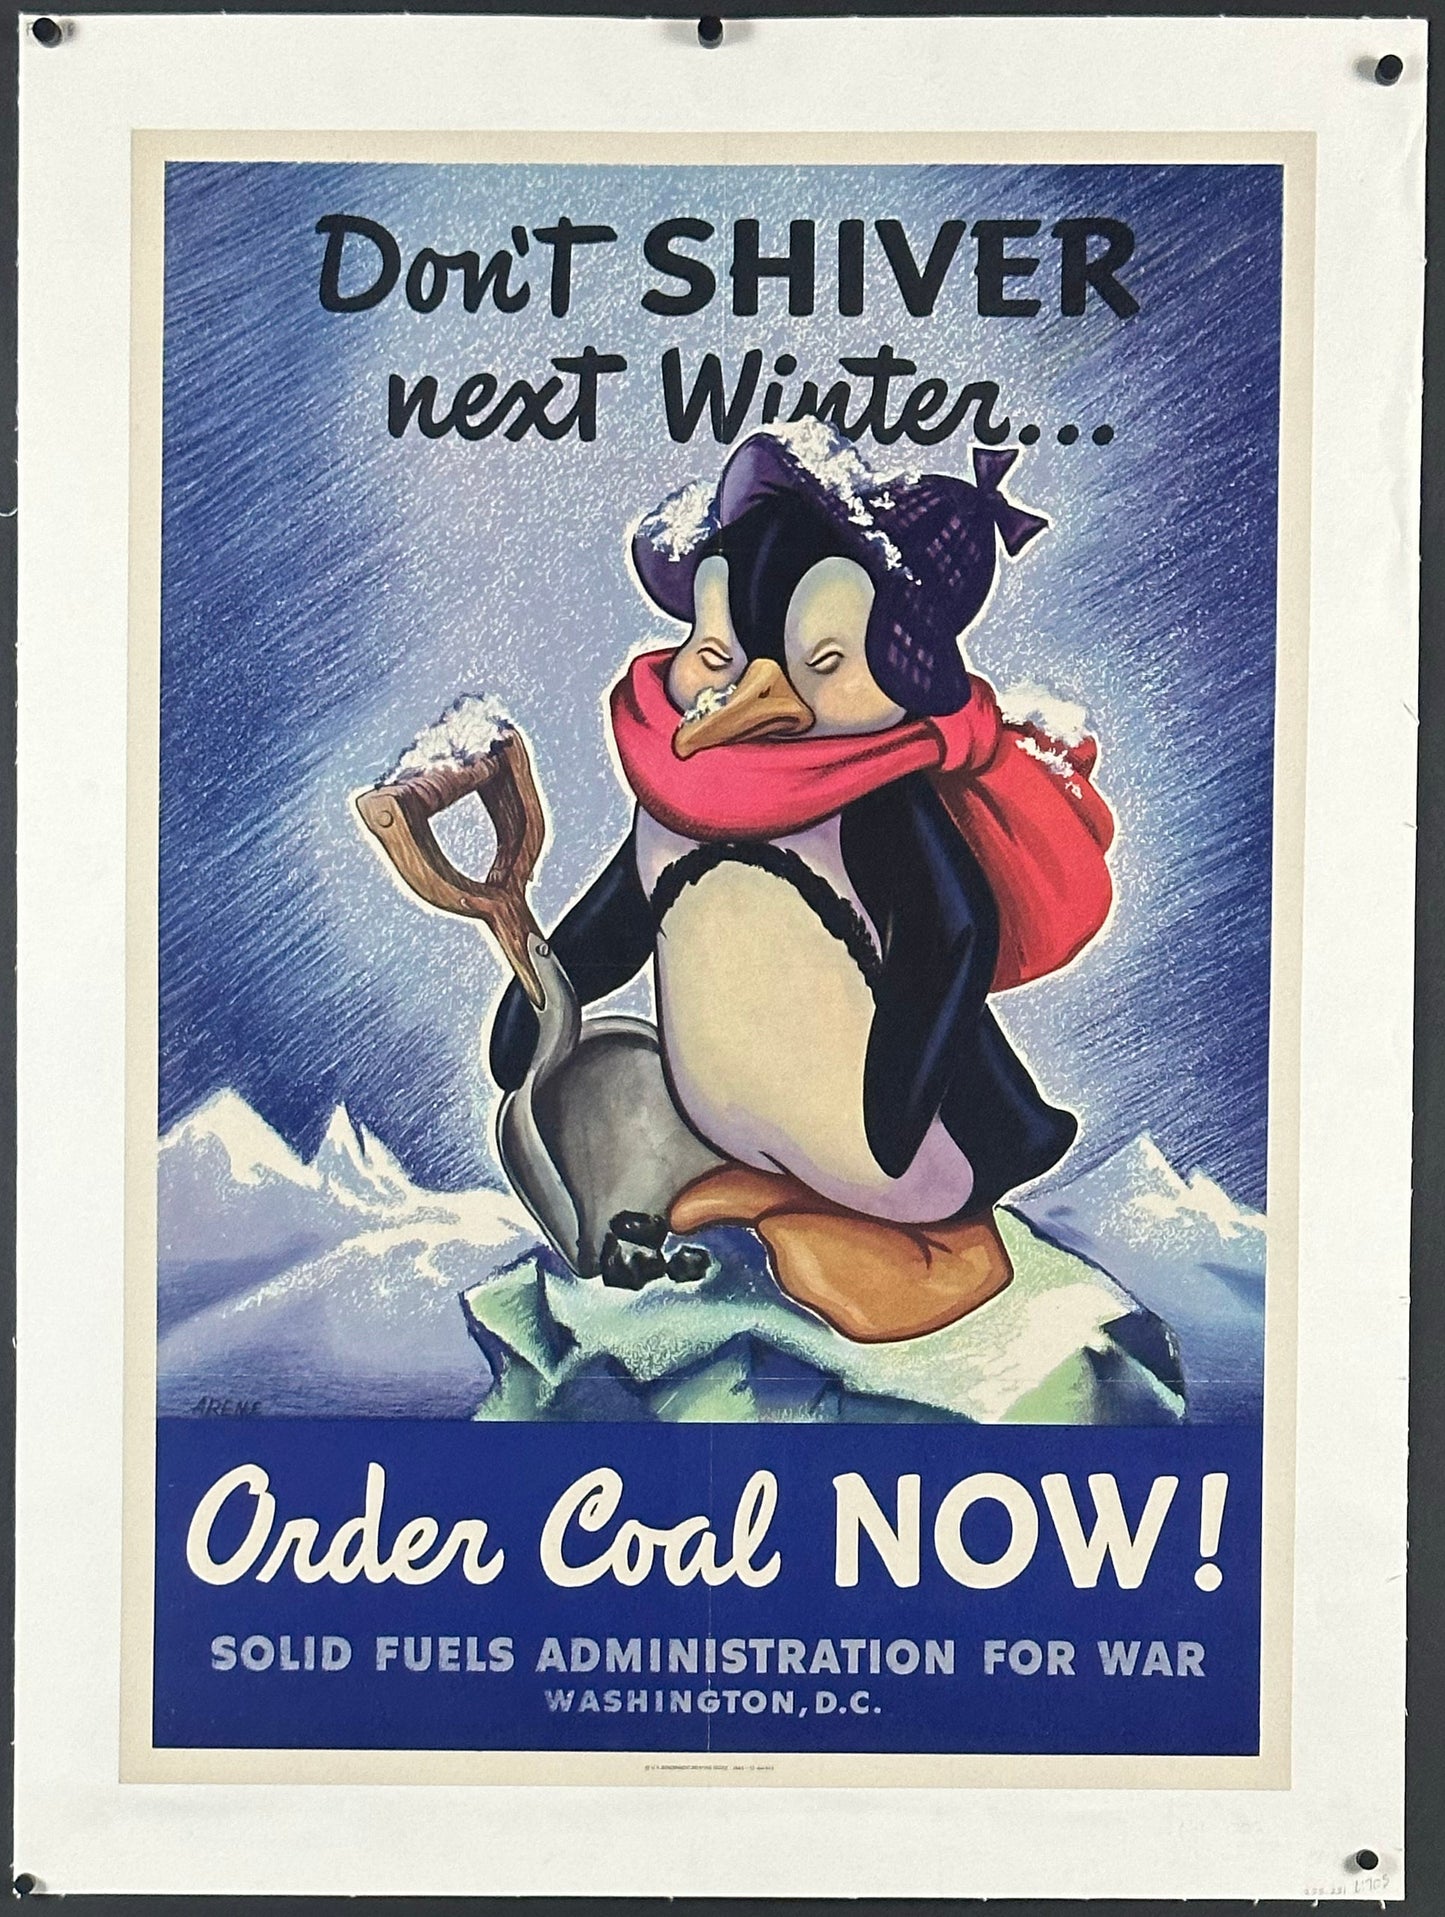 "Don't Shiver Next Winter" Coal Rationing WWII Home Front Poster by Egmont Arens (1944) - posterpalace.com